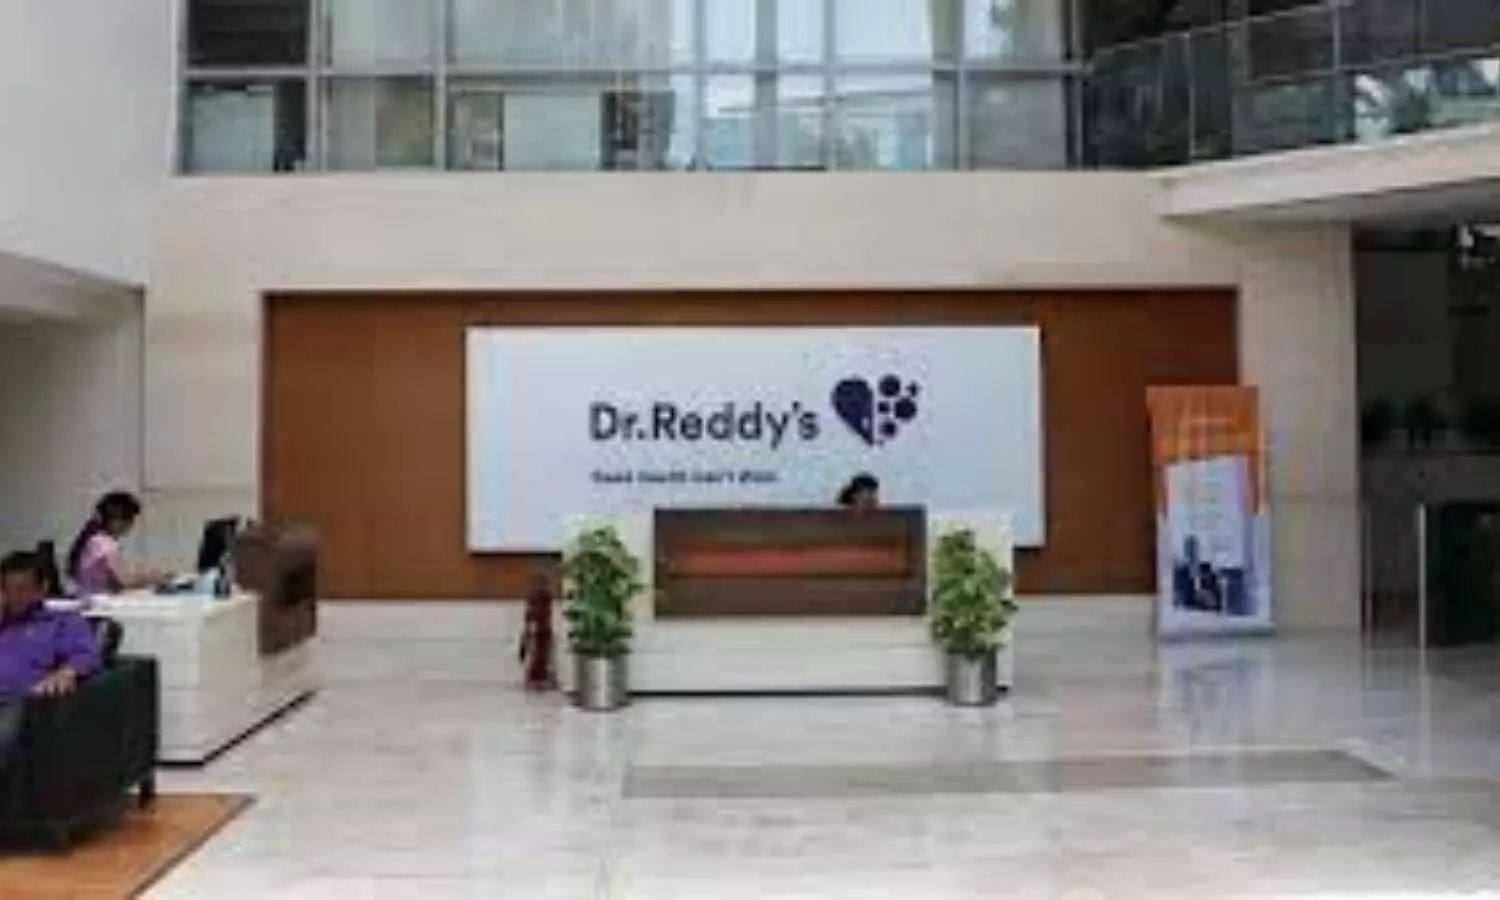 Dr Reddys beats Aurobindo Pharma to become second biggest drug maker in India: Report